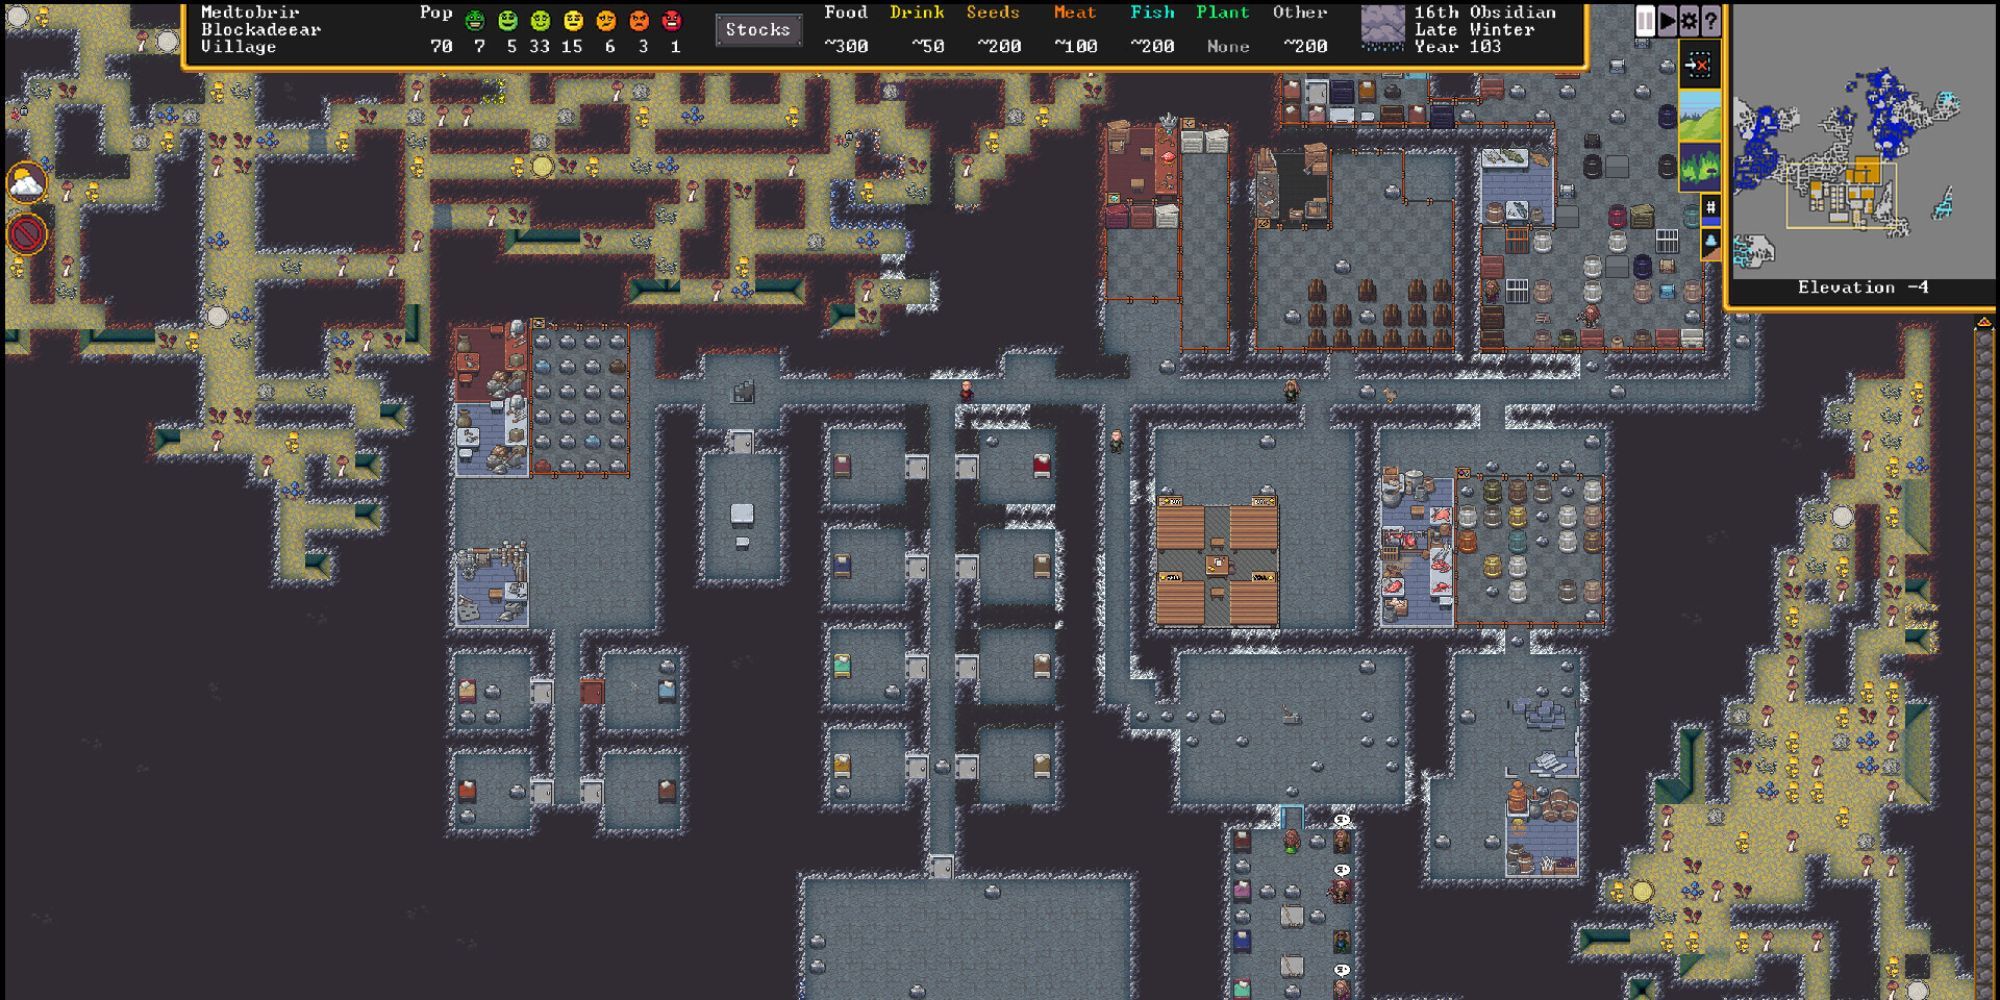 A player's base in Dwarf Fortress